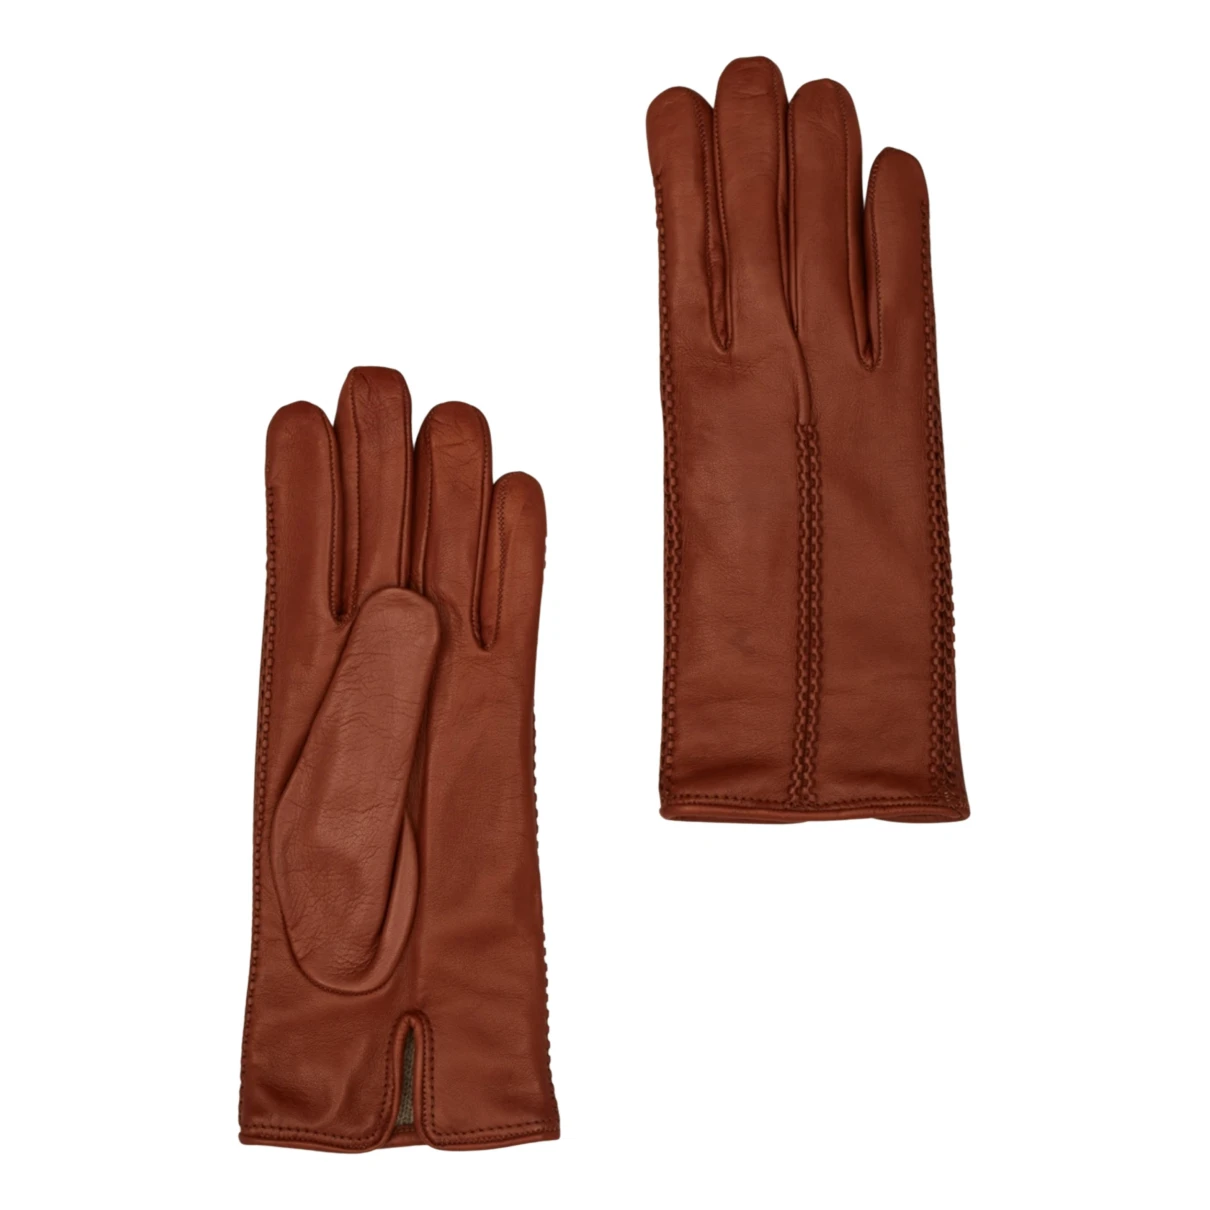 accessories Max Mara gloves for Female Leather 7 Inches. Used condition